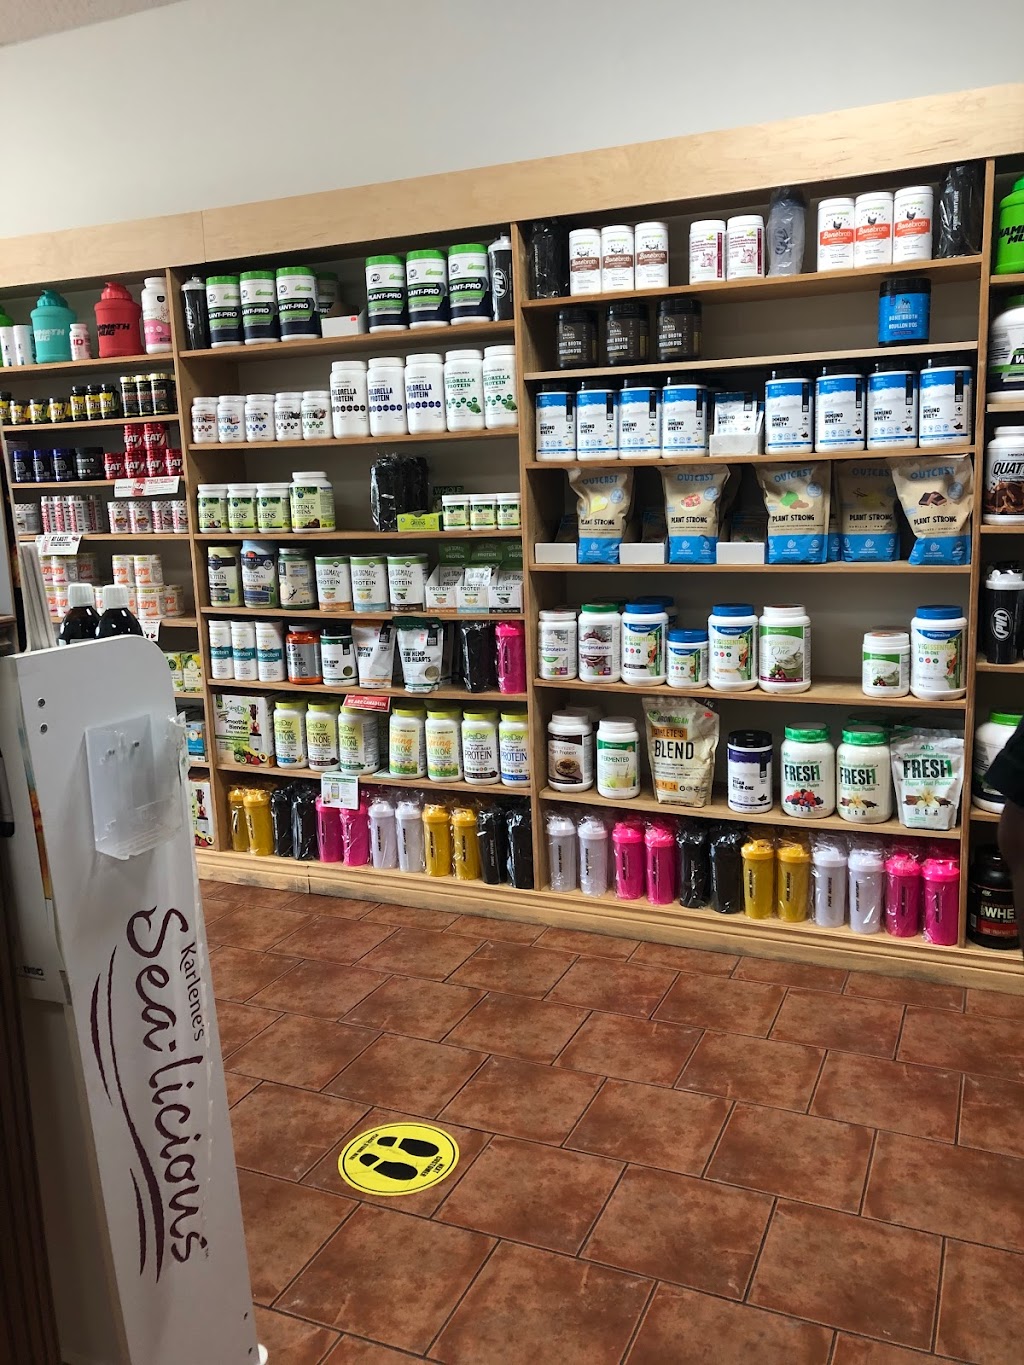 Pure Nature Nutrition Centers | 3174 Dougall Ave, Windsor, ON N9E 1S6, Canada | Phone: (519) 967-9865